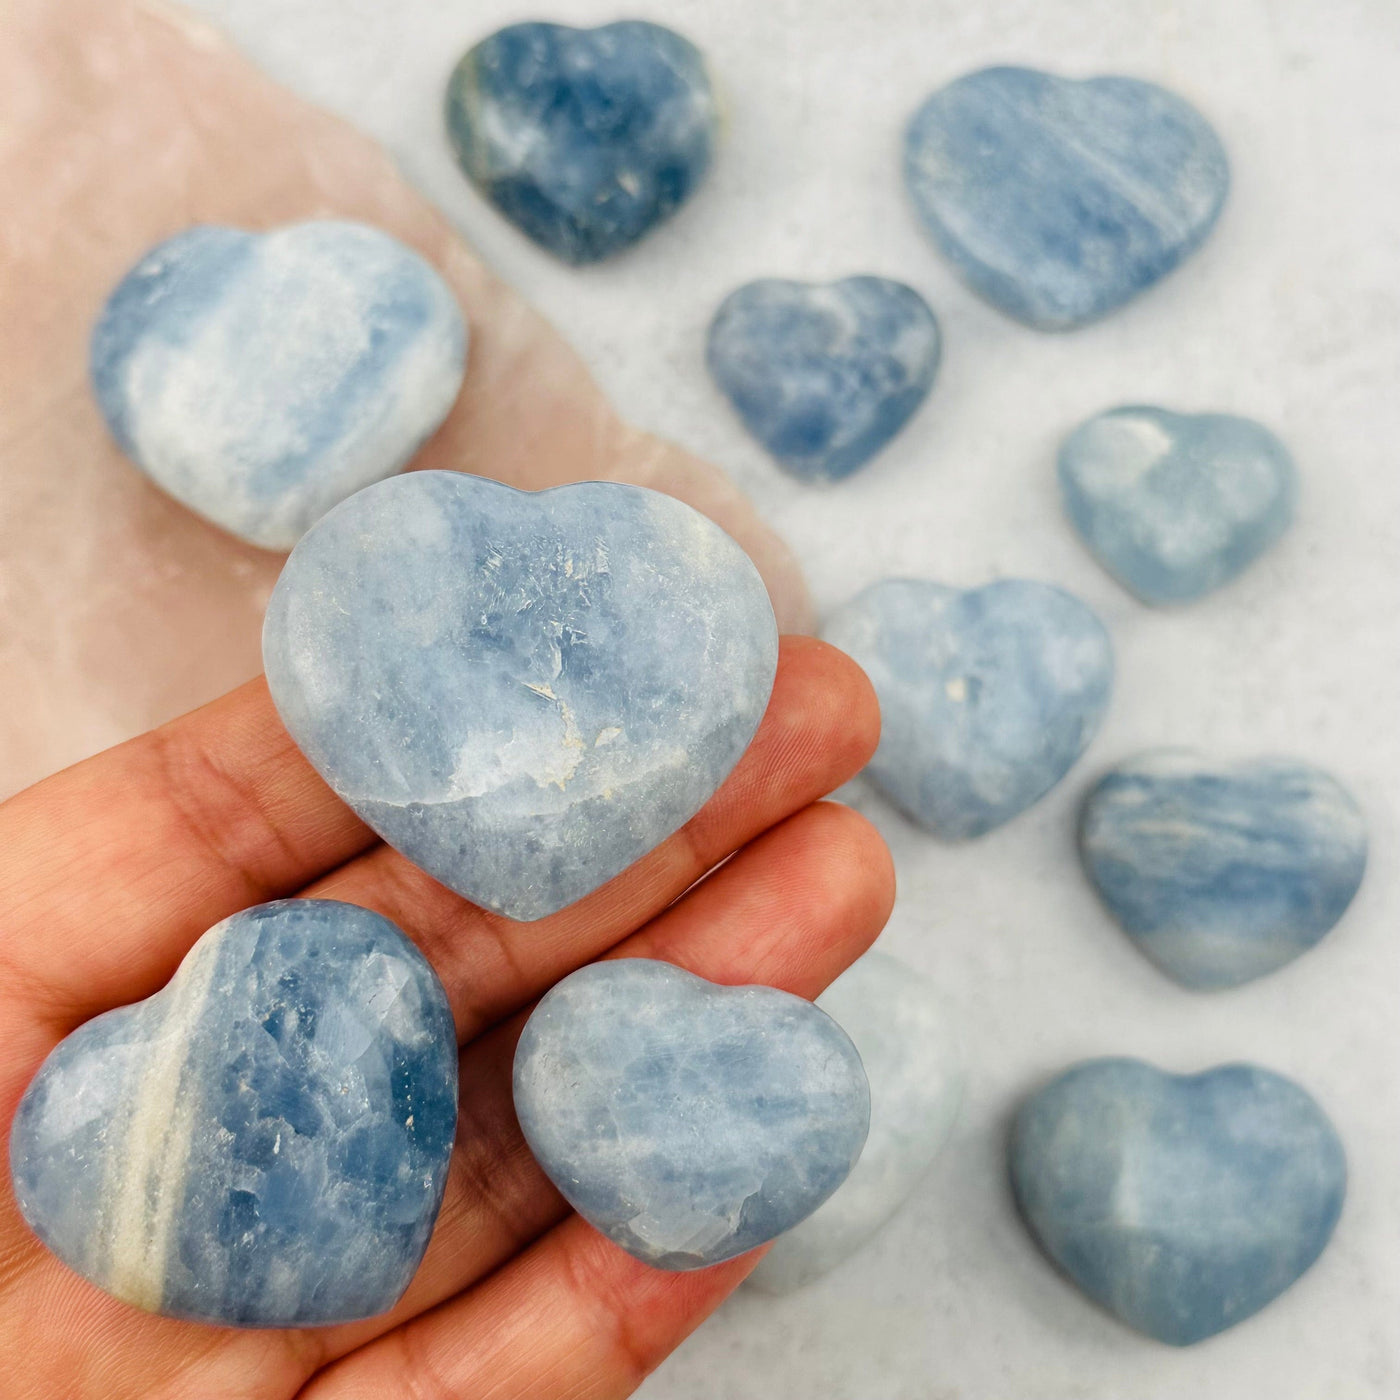 Blue Calcite Hearts in hand for size reference 